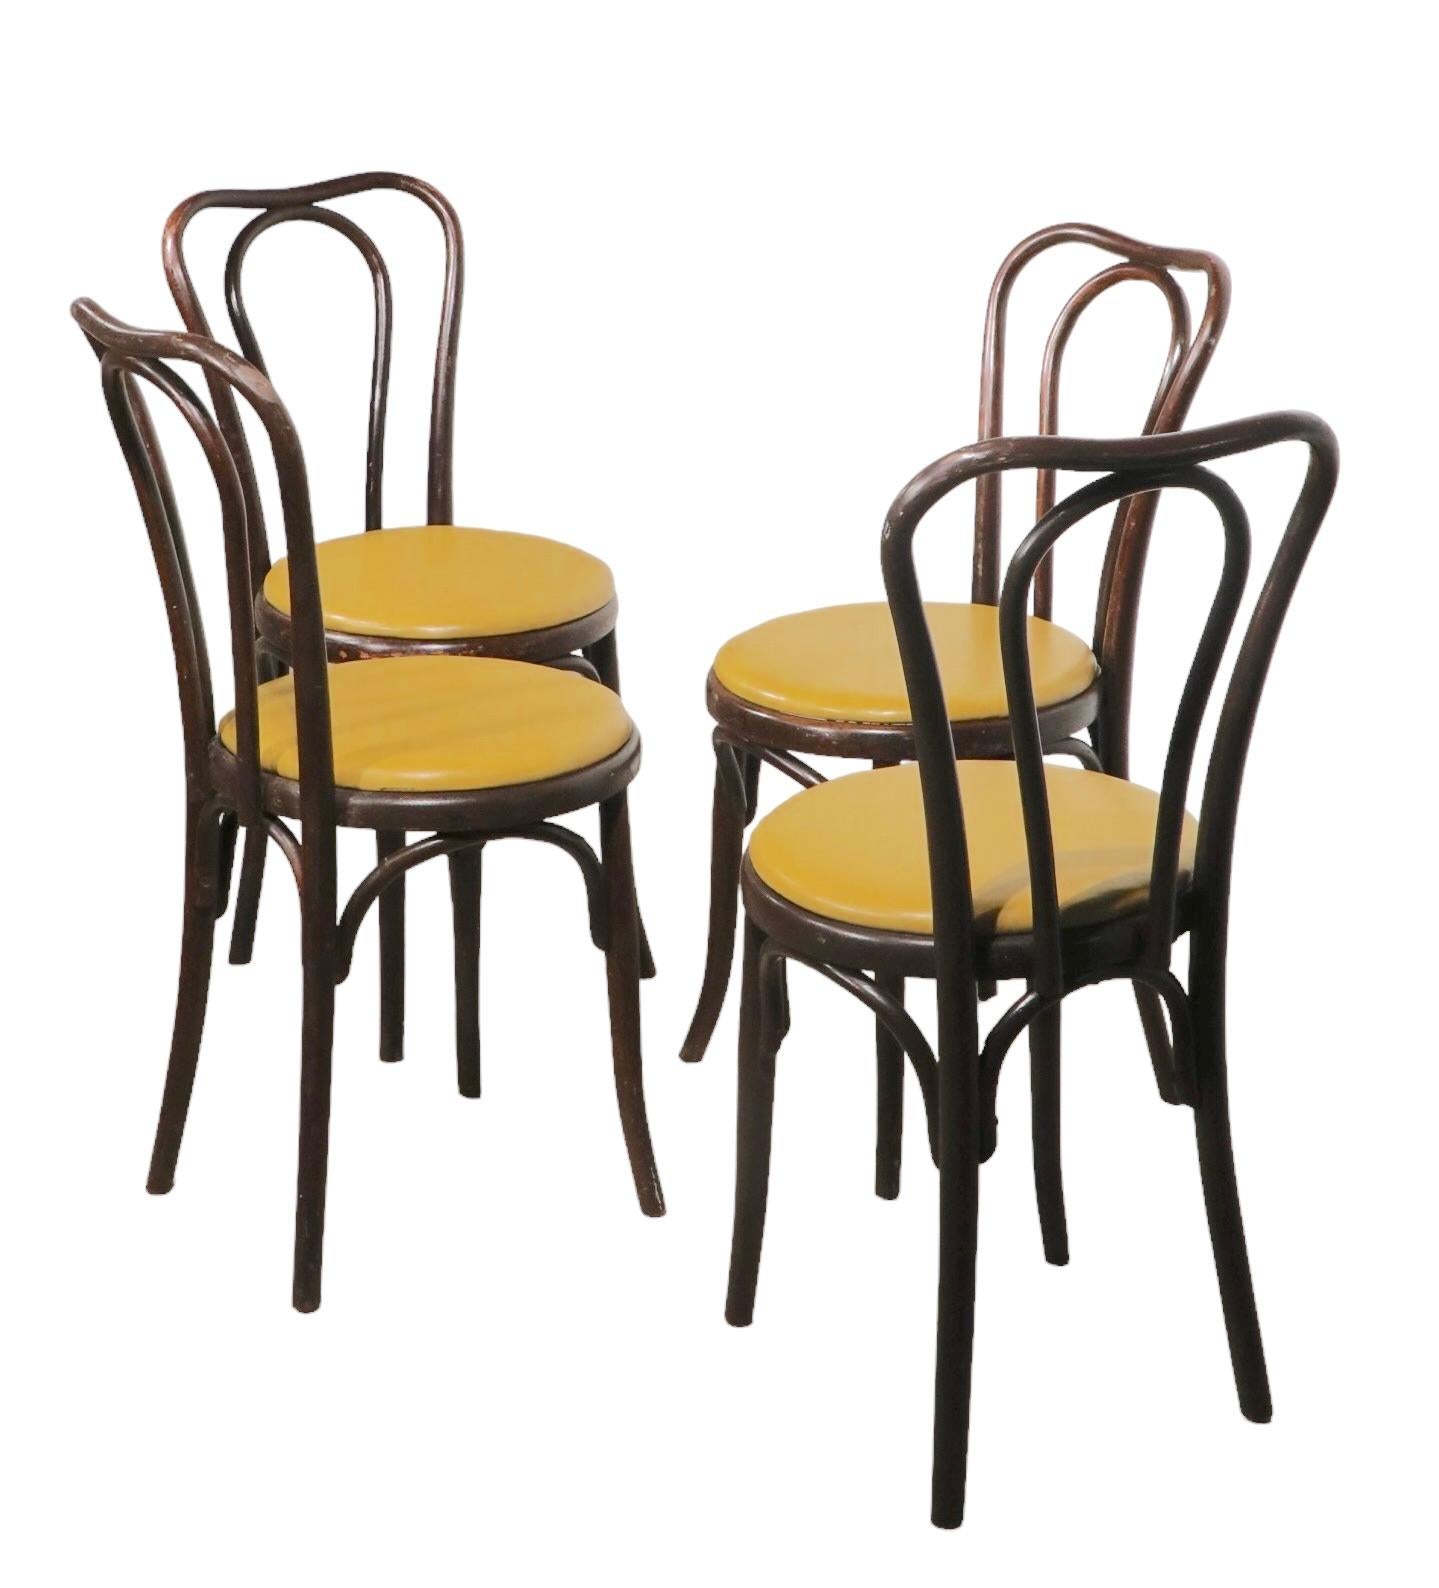 Iconic Thonet steam bent case, bistro style dining chairs, unusual to find a large lots still together and intact, we currently have 12 chairs , however please check availability prior to placing an order as we are offering them individually and